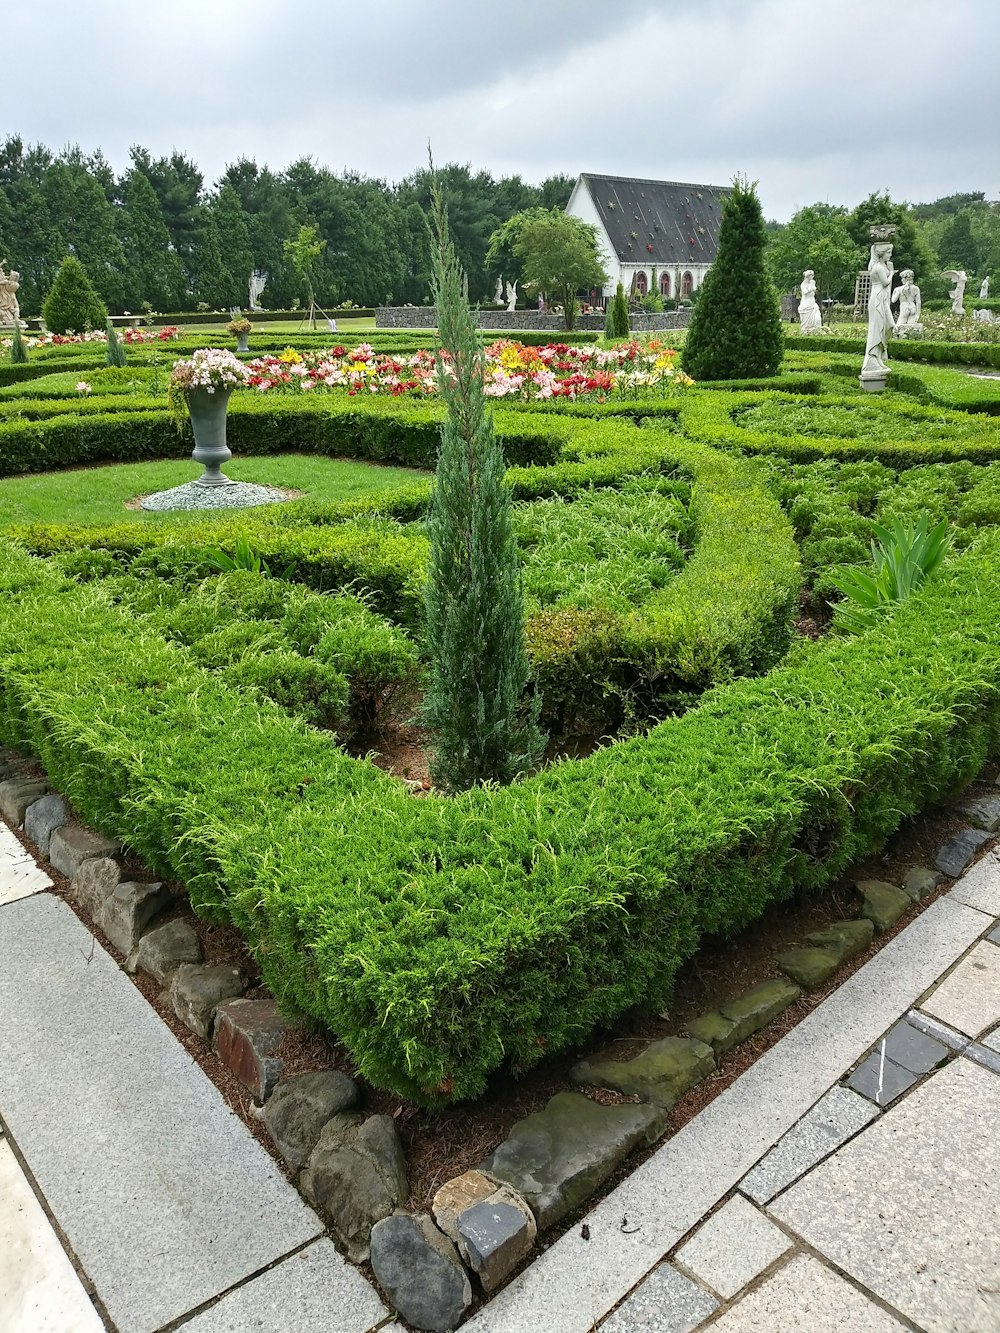 a very nice looking garden with a very nice design